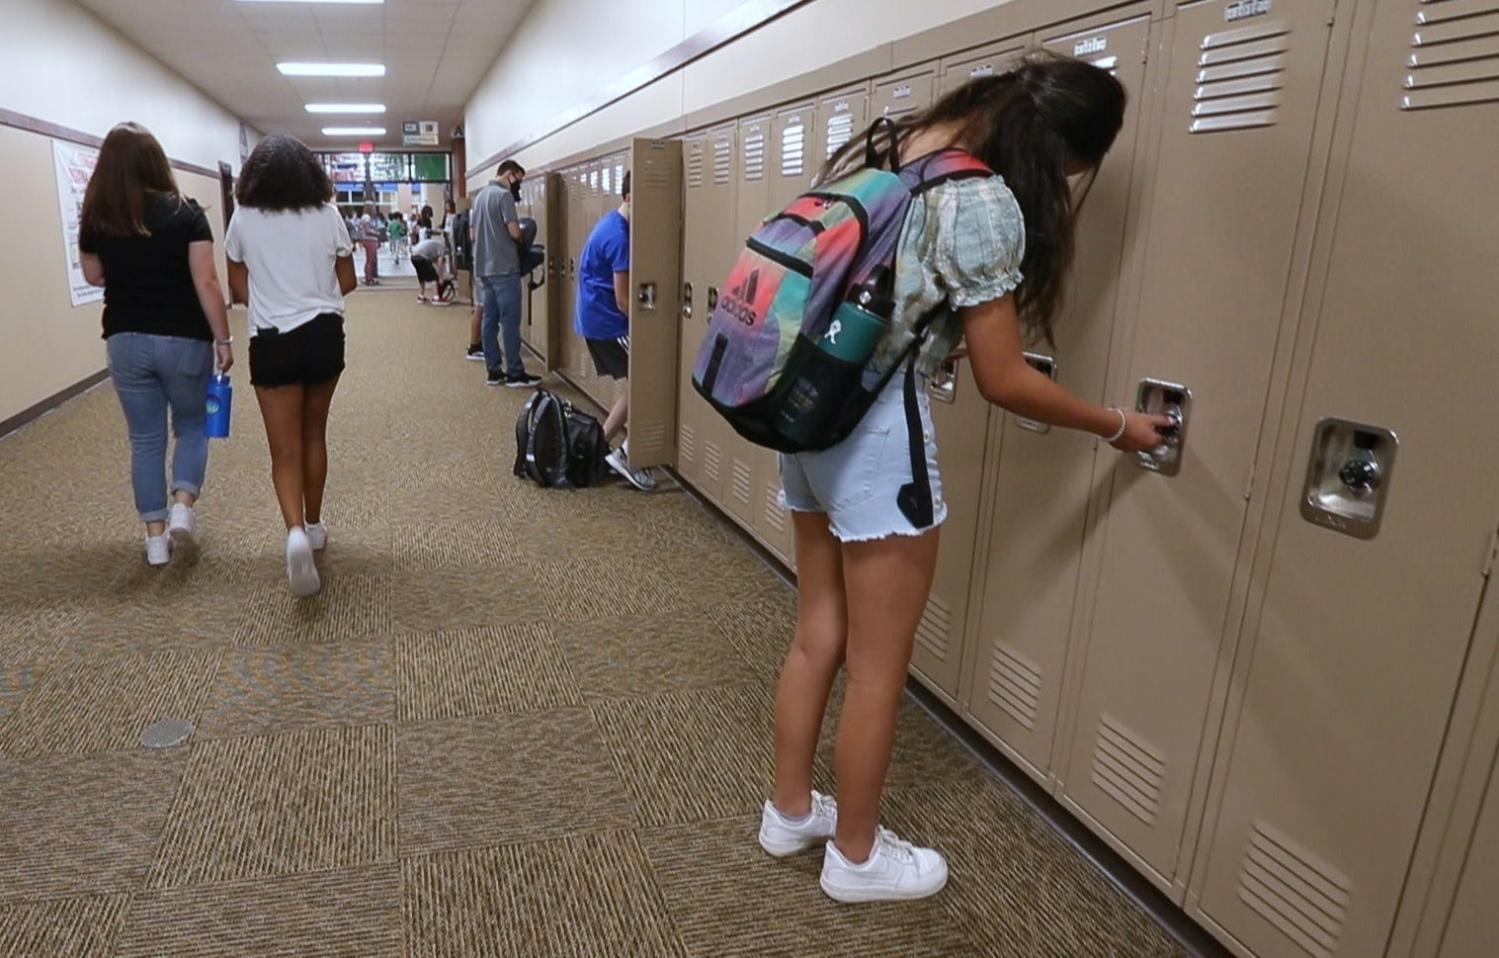 Students check their lockers as they arrive for the first day of the 2021-22 school year Wednesday, Aug. 4, 2021, at HSE Intermediate & Junior High School.Hse Schools Begin Their First Day Of The 2021 22 School Year